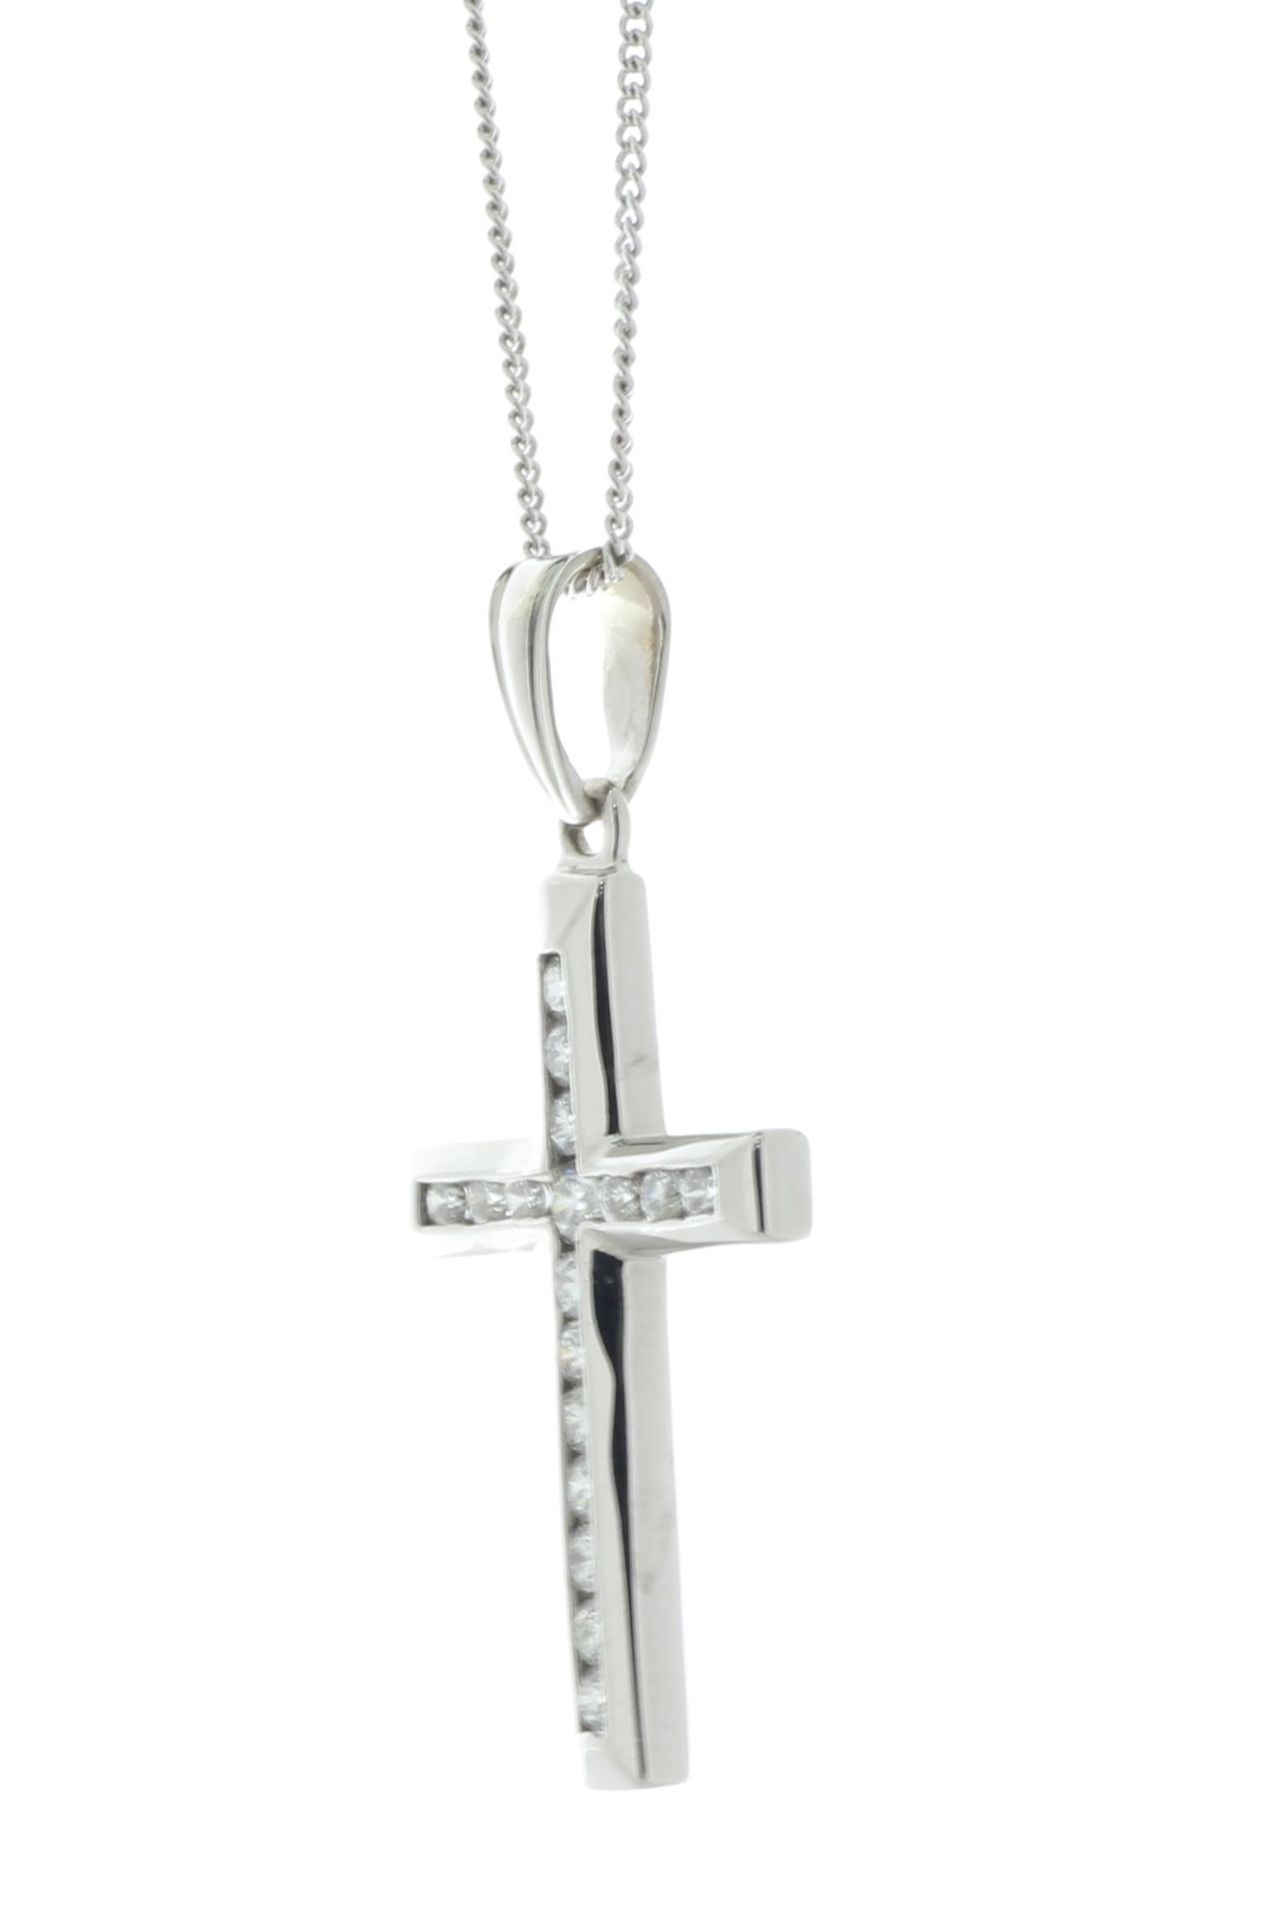 10ct Gold Cross Diamond Pendant And 18" Chain 0.60 Carats - Valued By AGI £3,770.00 - A gorgeous - Image 3 of 4